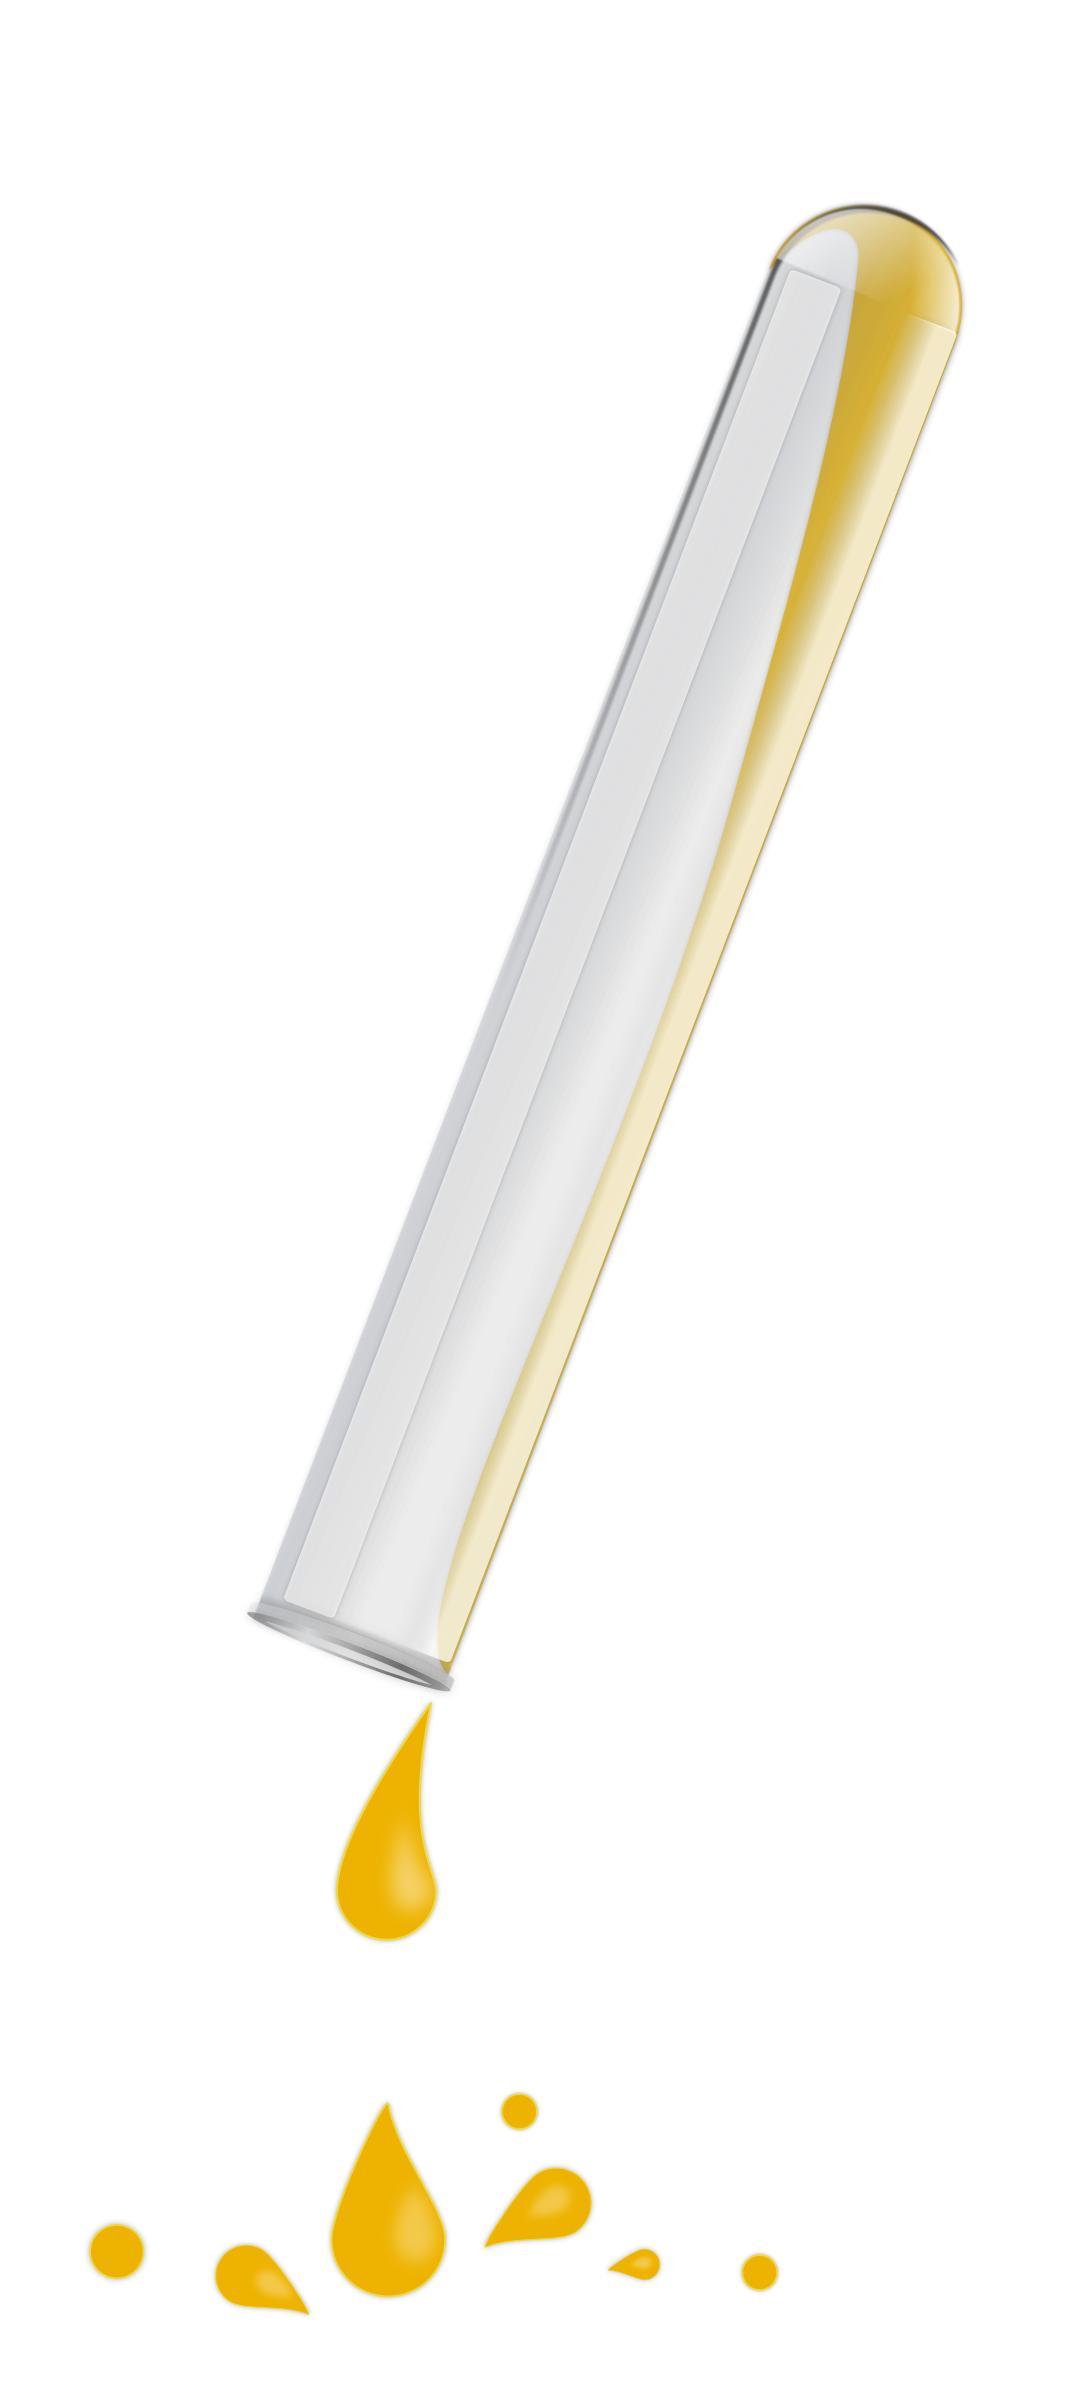 Test tube dripping png transparent